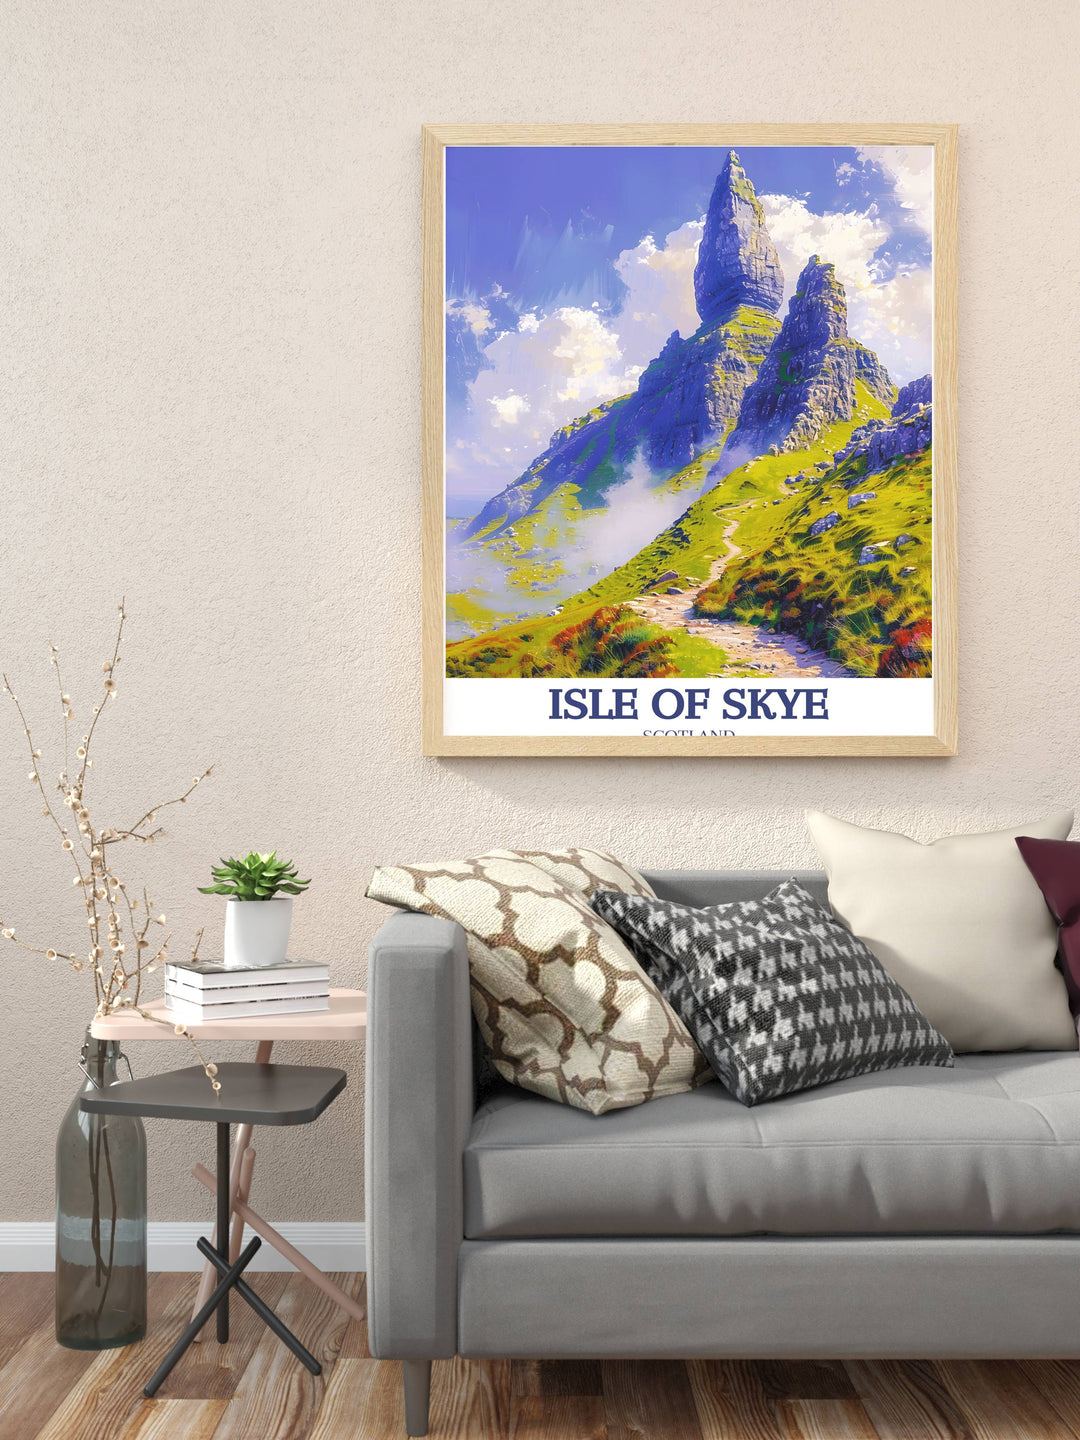 An inspiring Isle of Skye poster with a panoramic view of The Storr, blending artistic expression with natural scenery to spark wanderlust and dreams of travel.